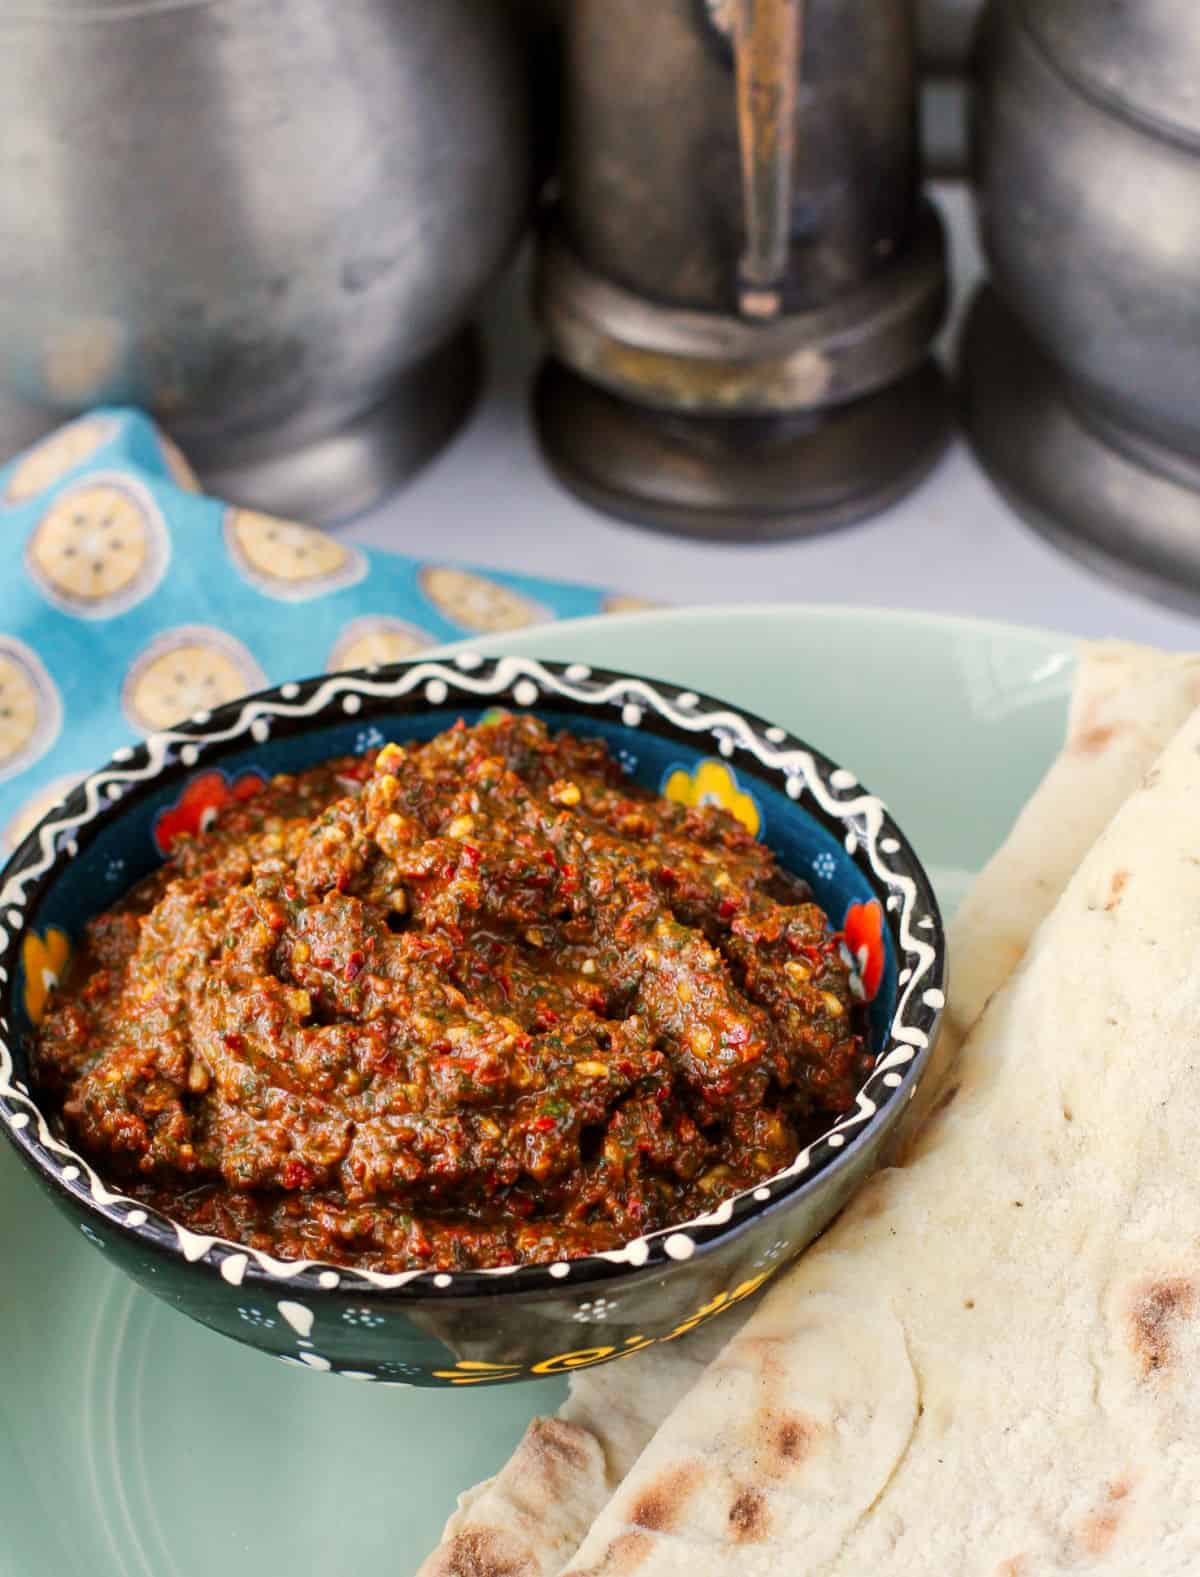 Red Zhug (Yemenite Hot Sauce) on a plate with lavash.